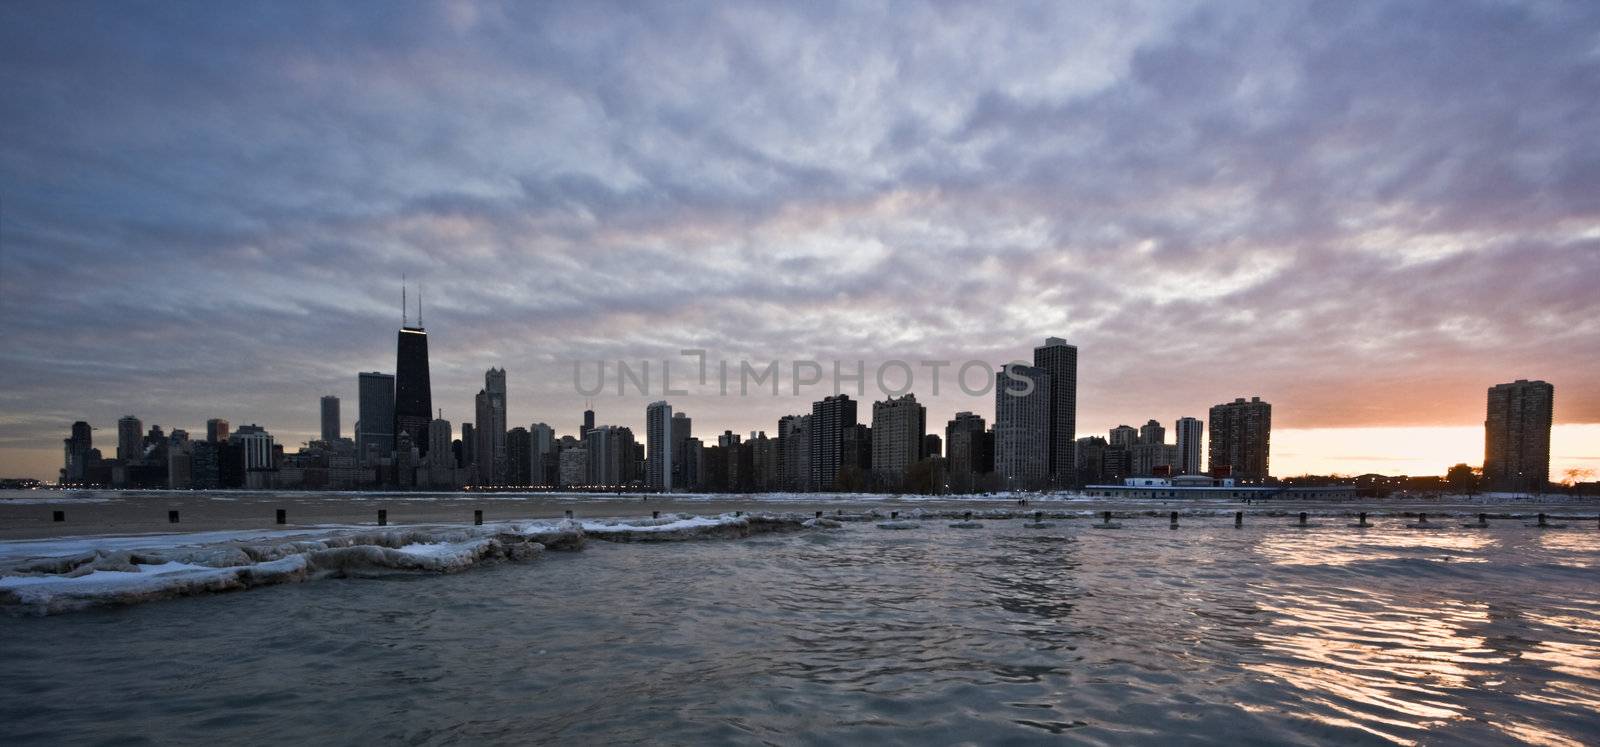 Evening in Chicago by benkrut